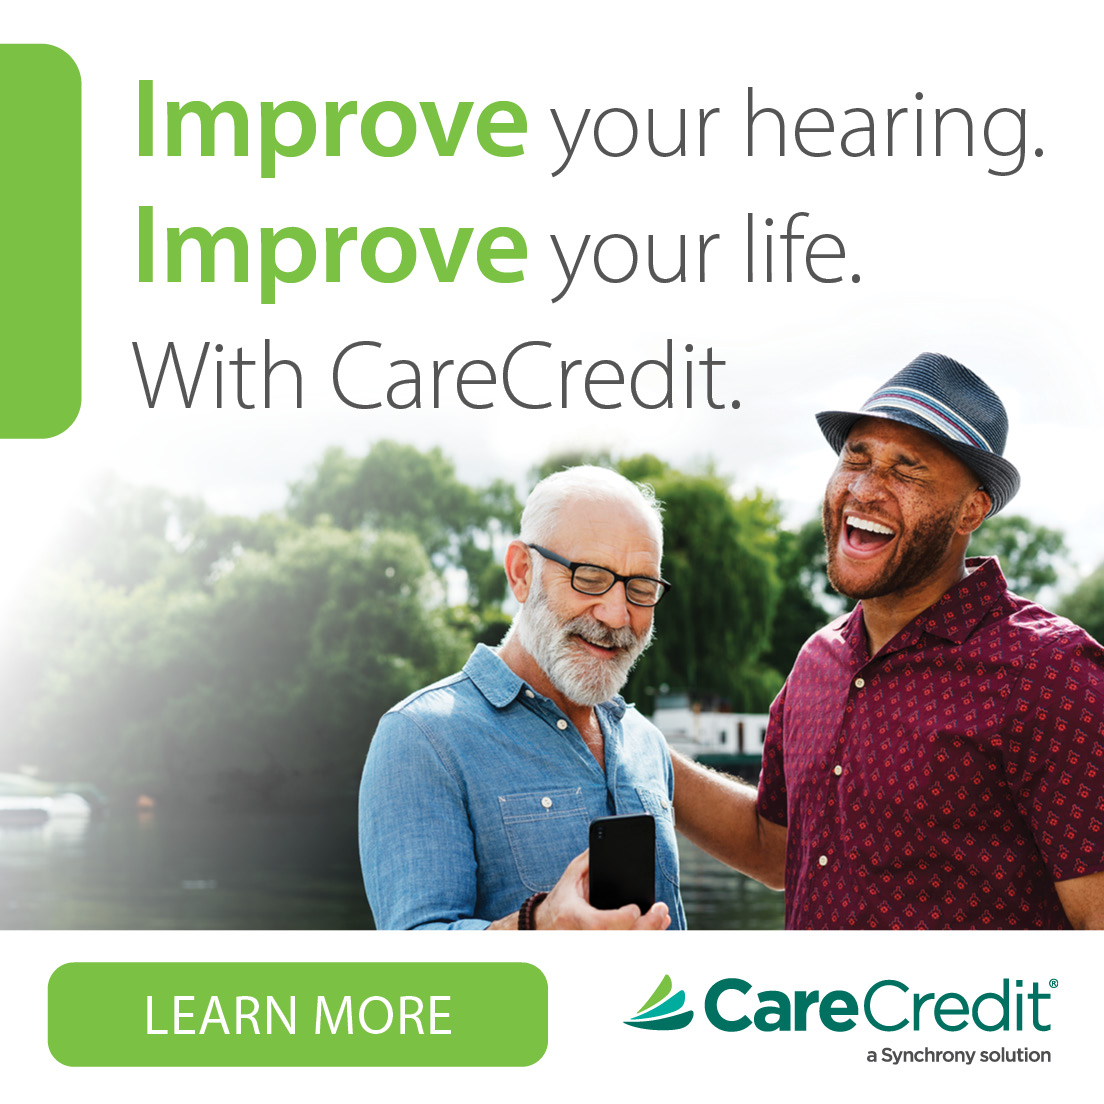 Improve your hearing, improve your life with CareCredit